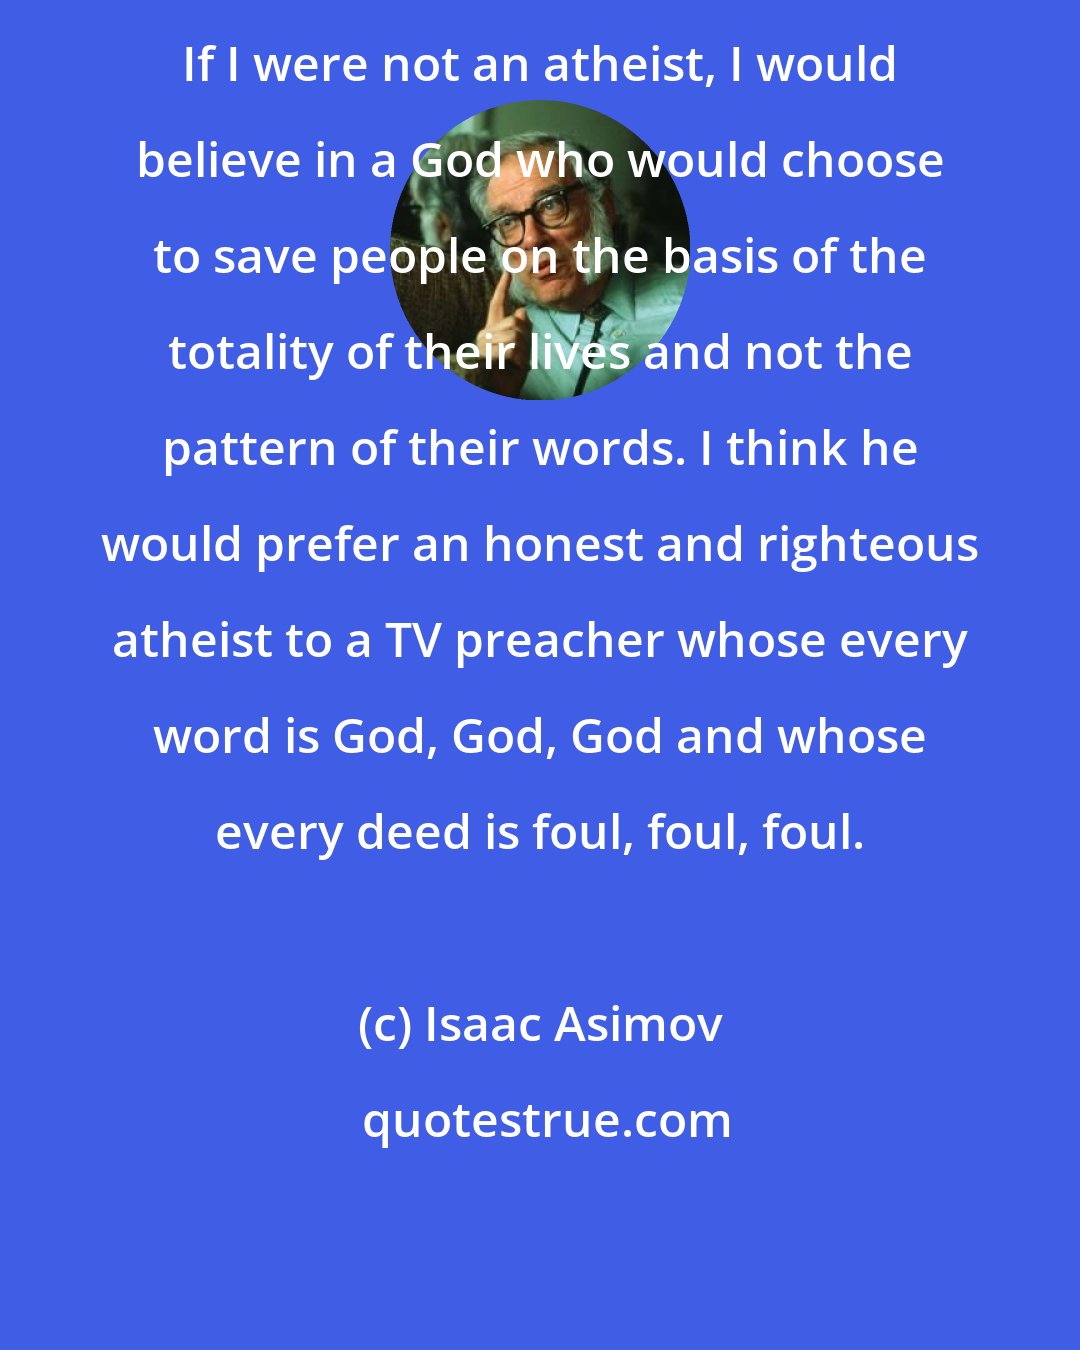 Isaac Asimov: If I were not an atheist, I would believe in a God who would choose to save people on the basis of the totality of their lives and not the pattern of their words. I think he would prefer an honest and righteous atheist to a TV preacher whose every word is God, God, God and whose every deed is foul, foul, foul.